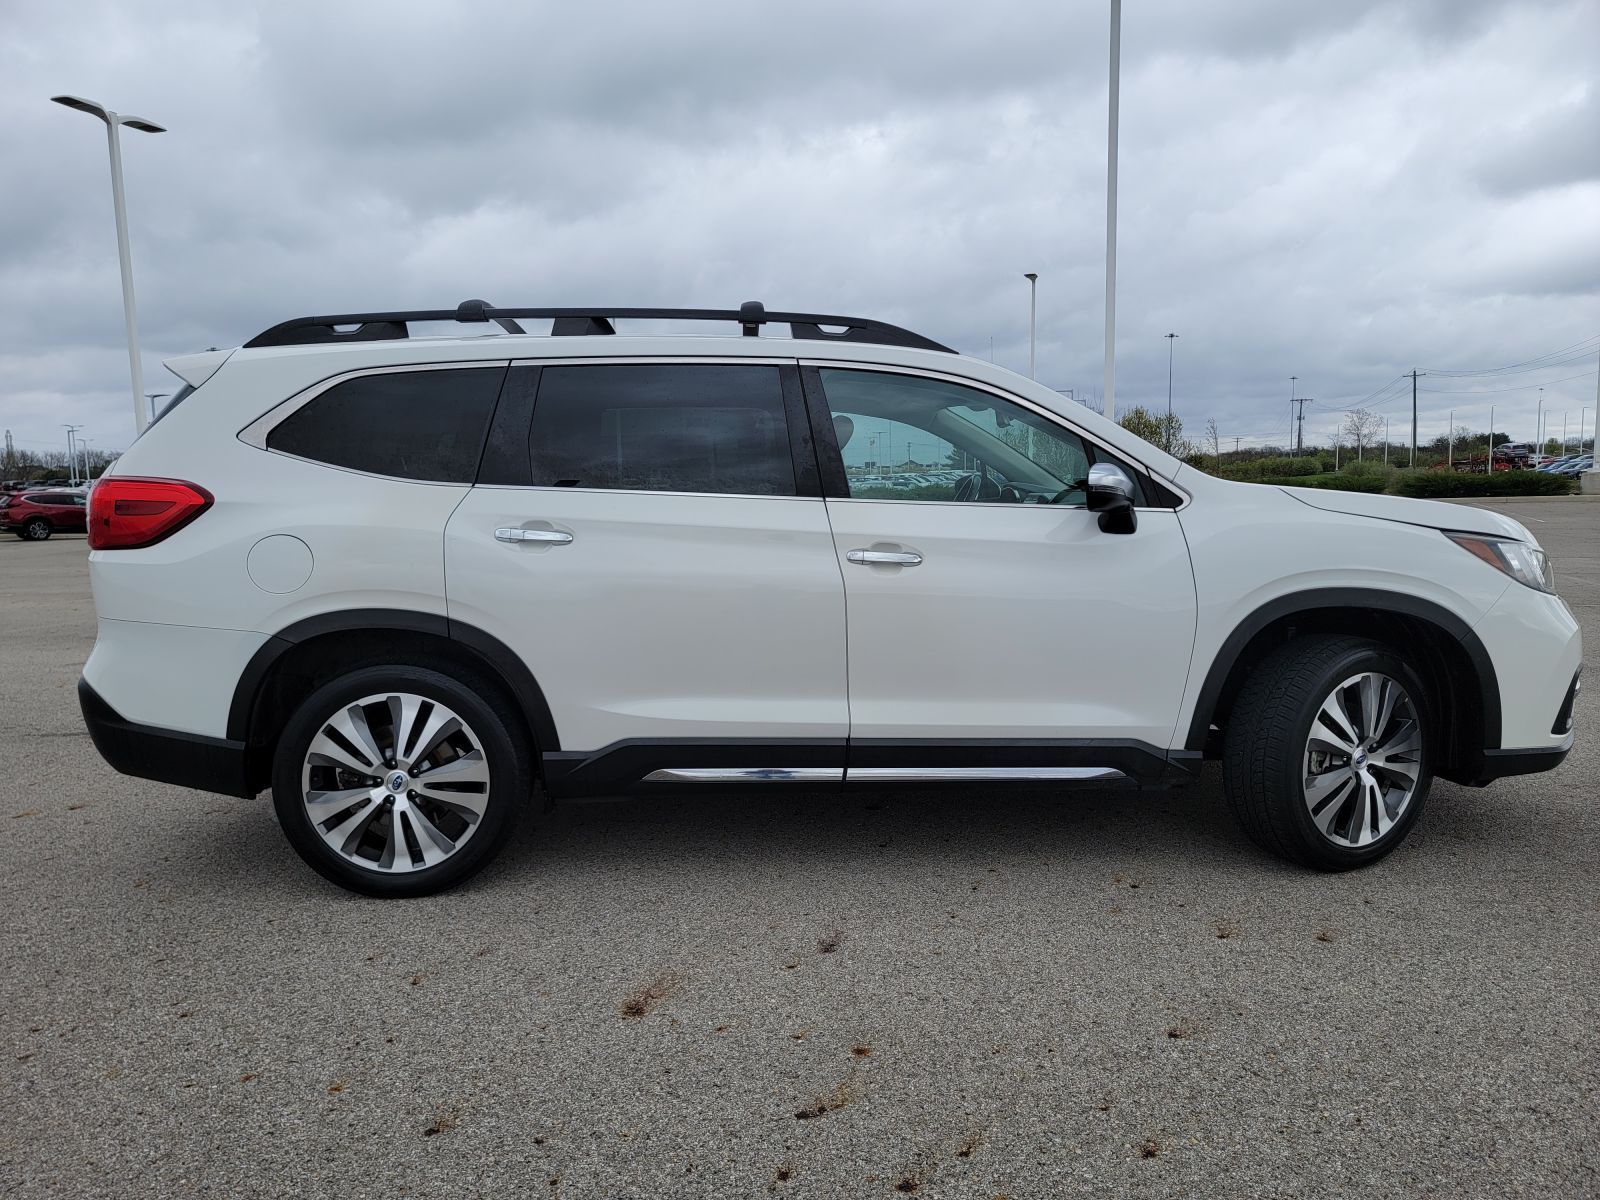 Used, 2019 Subaru Ascent Touring, White, G0131A-13